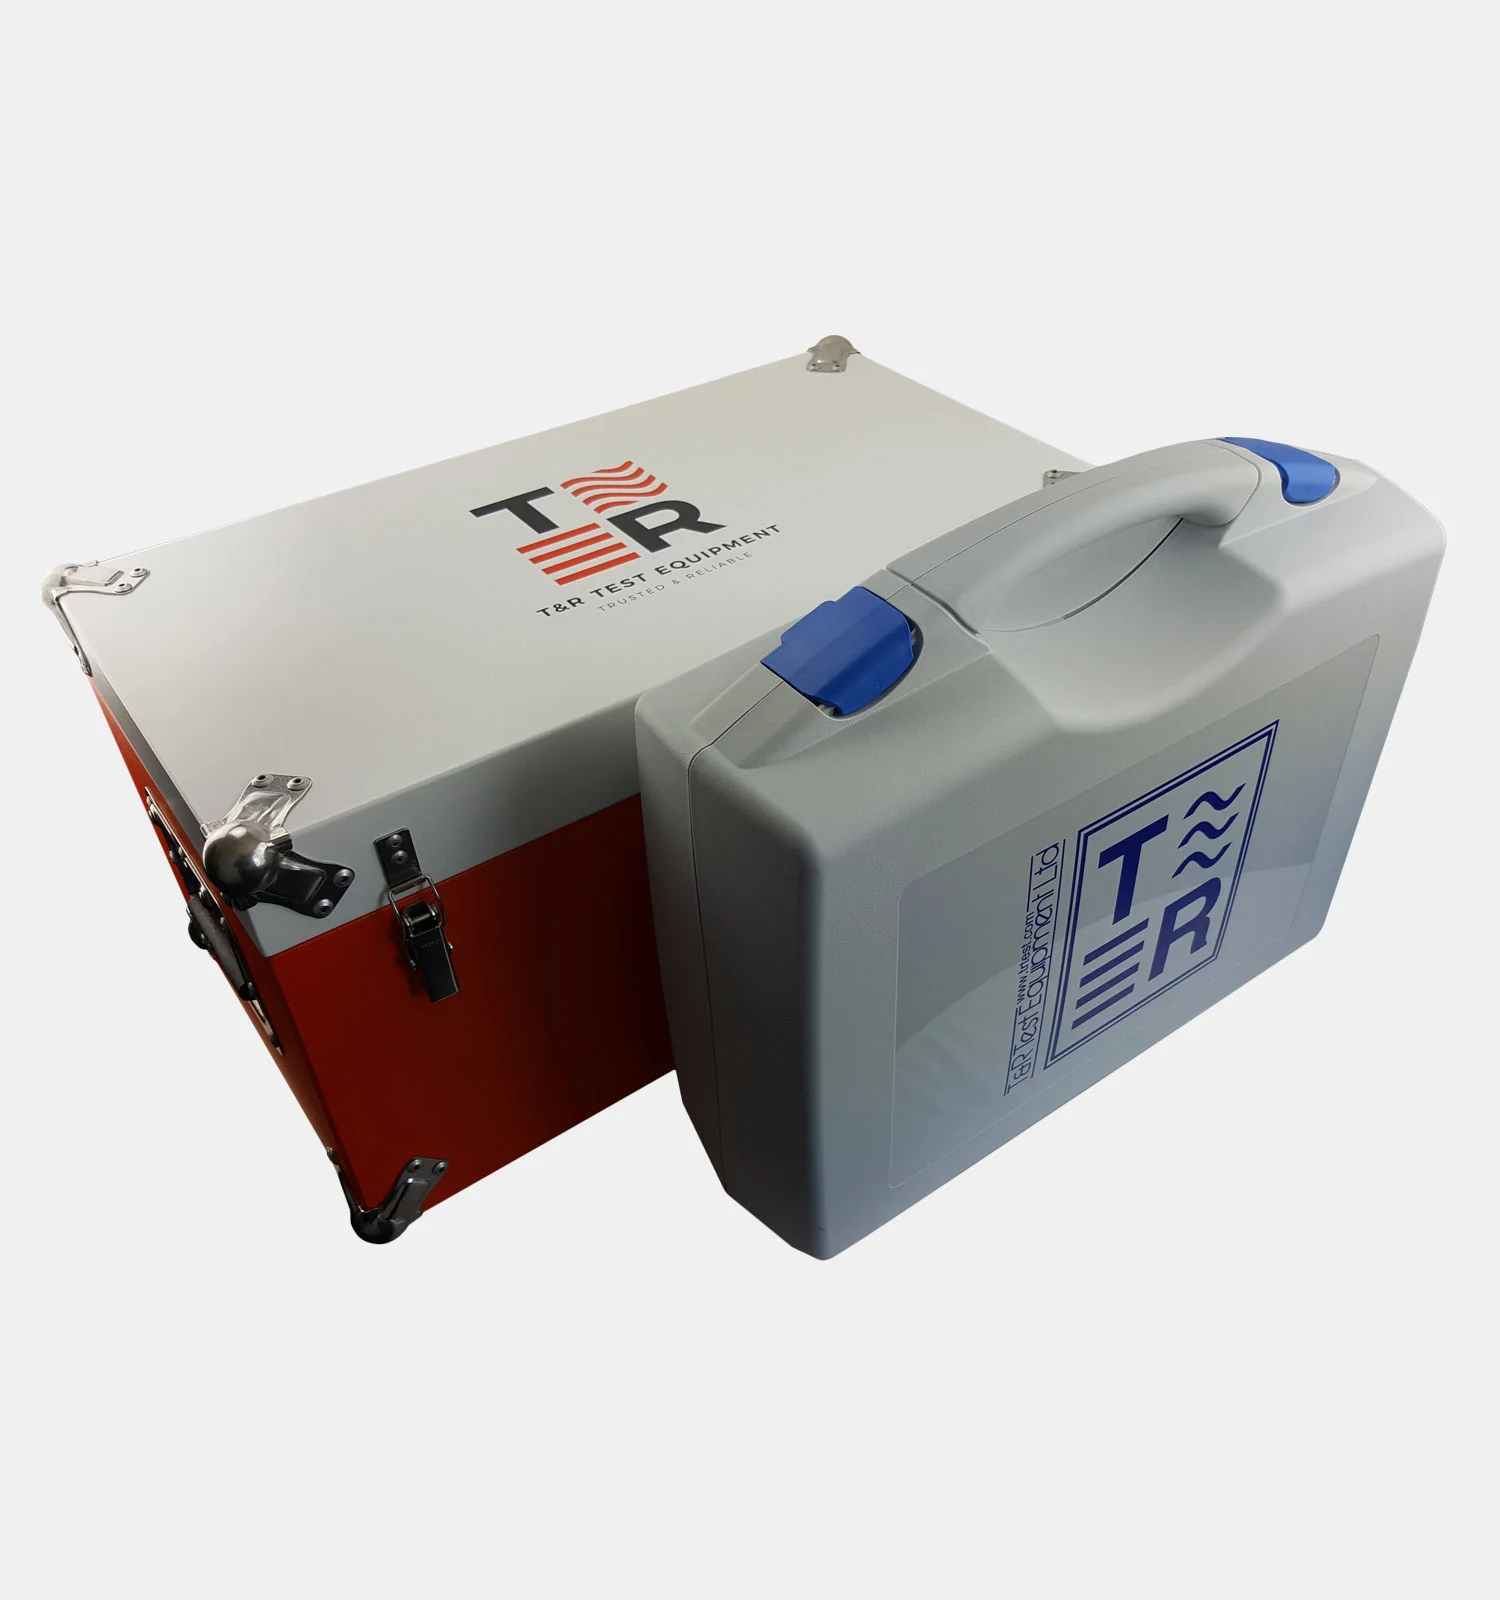 200A-3PH MK3 Secondary Current Injection Test Set